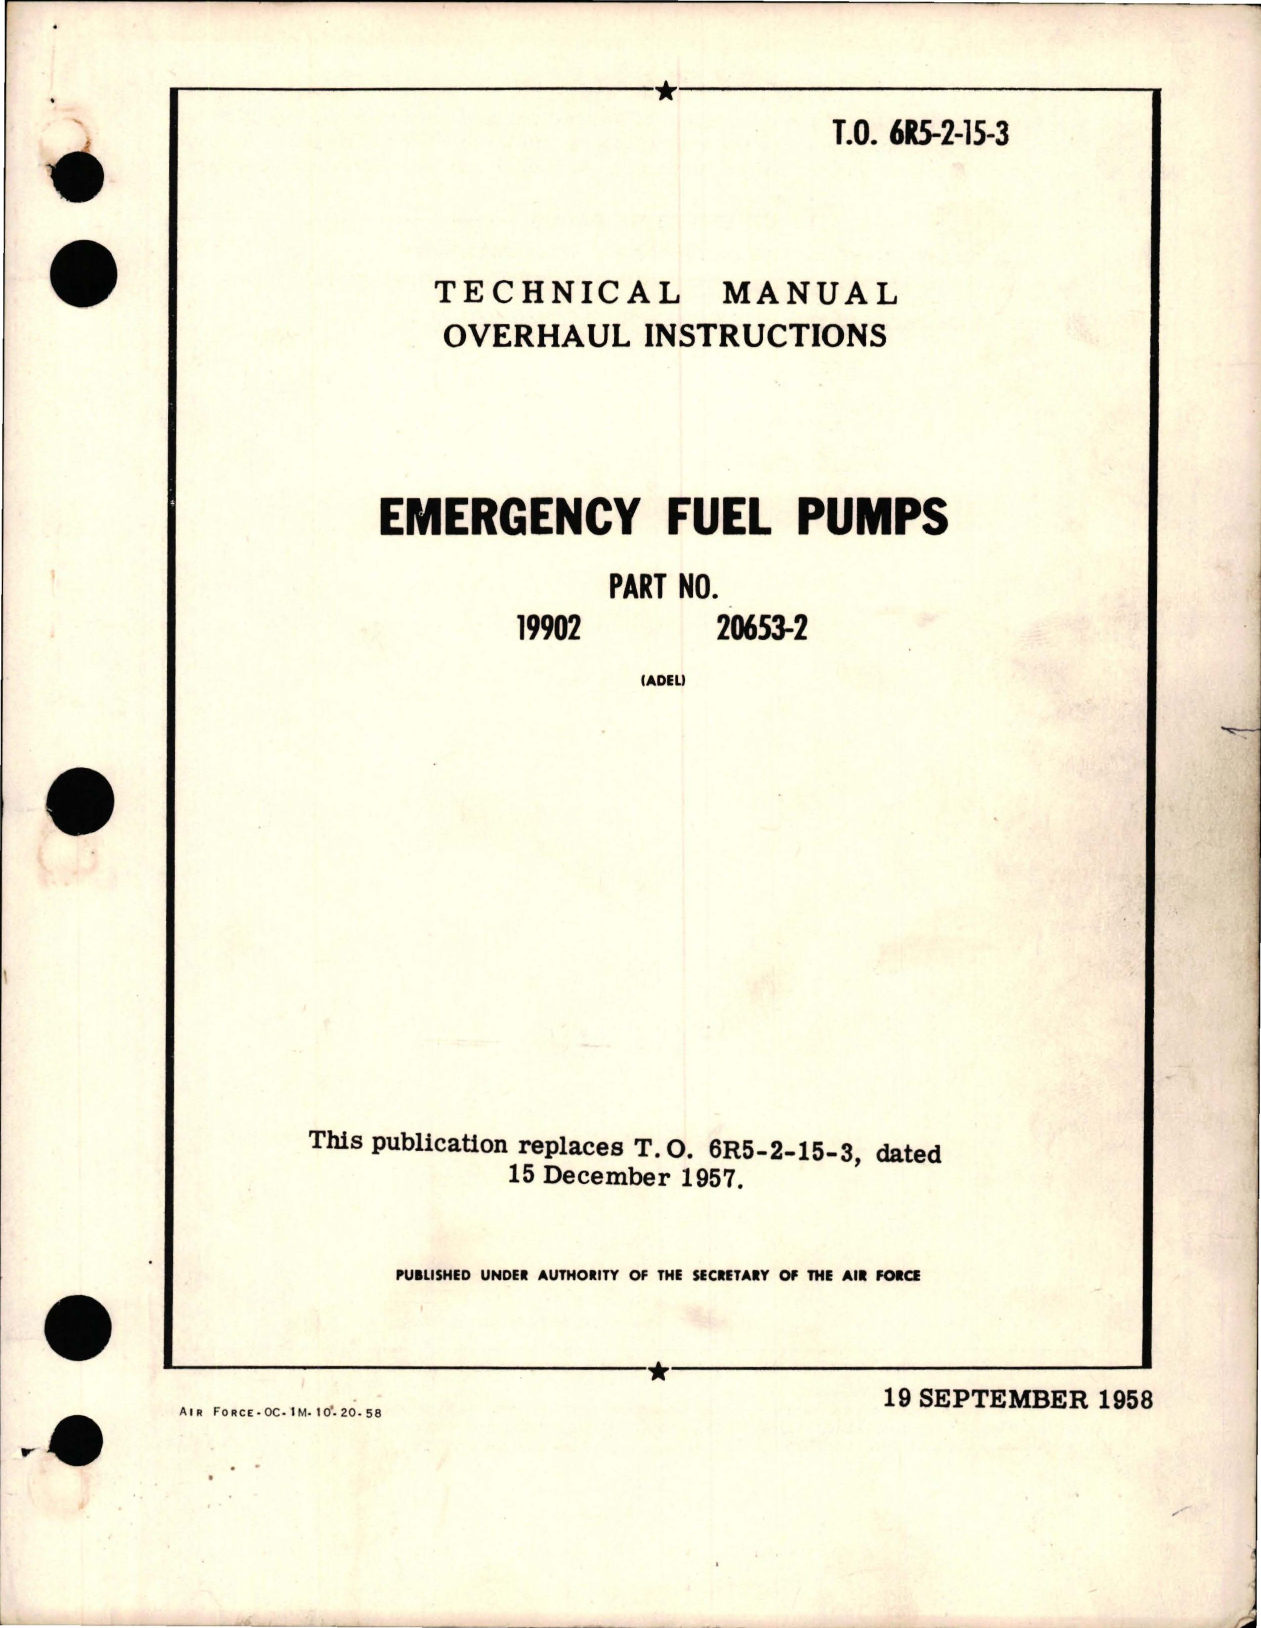 Sample page 1 from AirCorps Library document: Overhaul Instructions for Emergency Fuel Pumps - Parts 19902 and 20653-2 